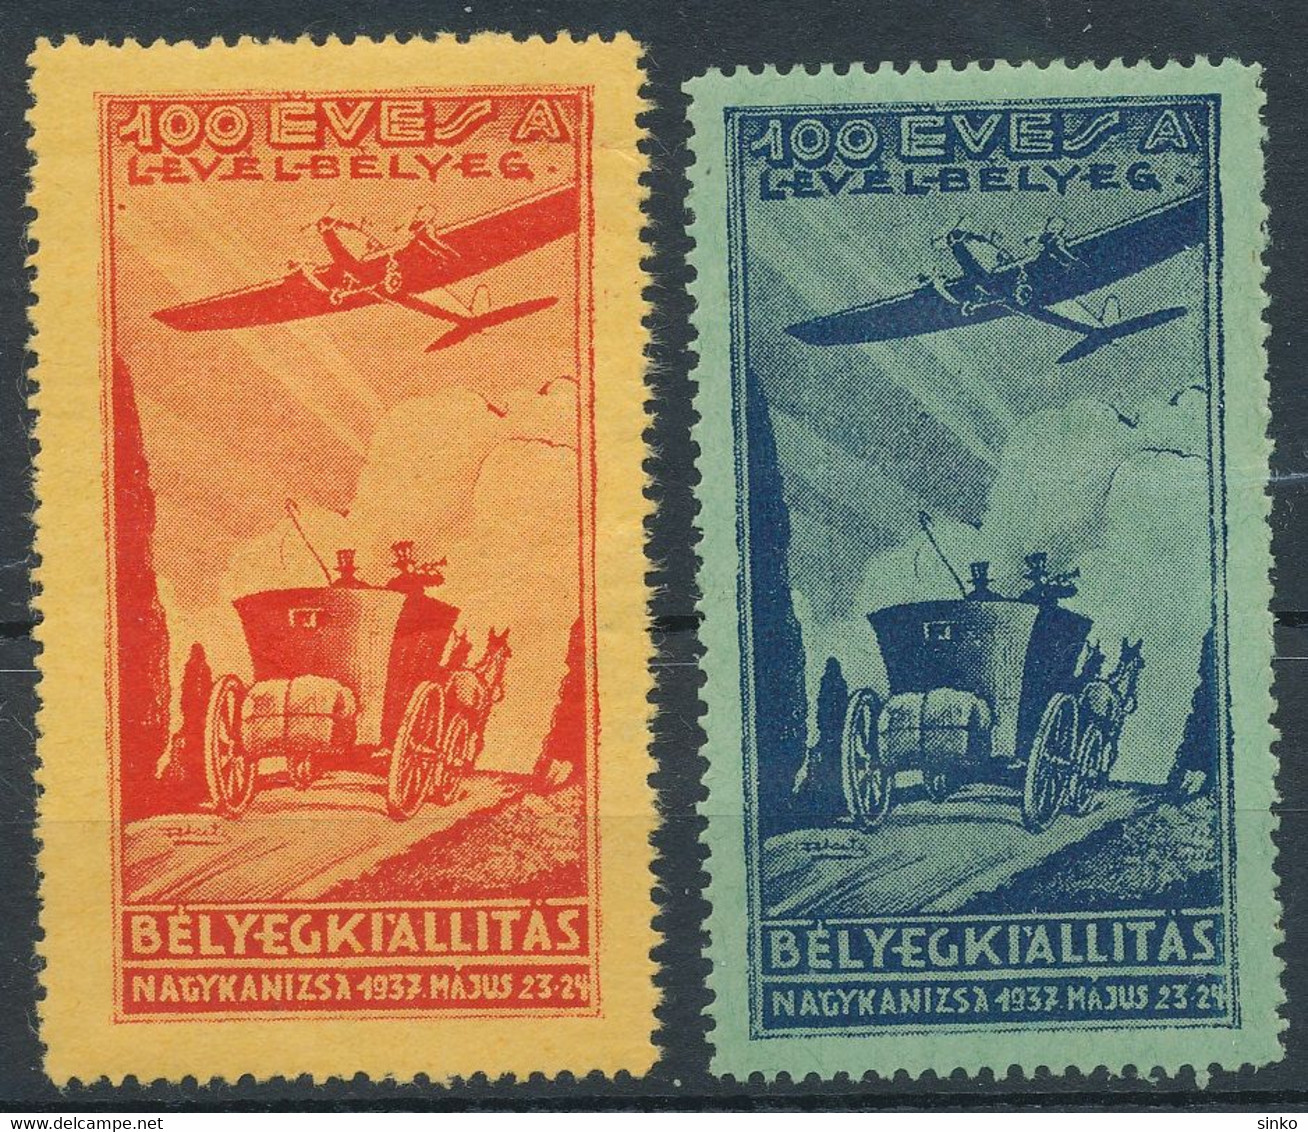 1937. First Stamp Exhibition In Nagykanizsa - Commemorative Sheet - Feuillets Souvenir